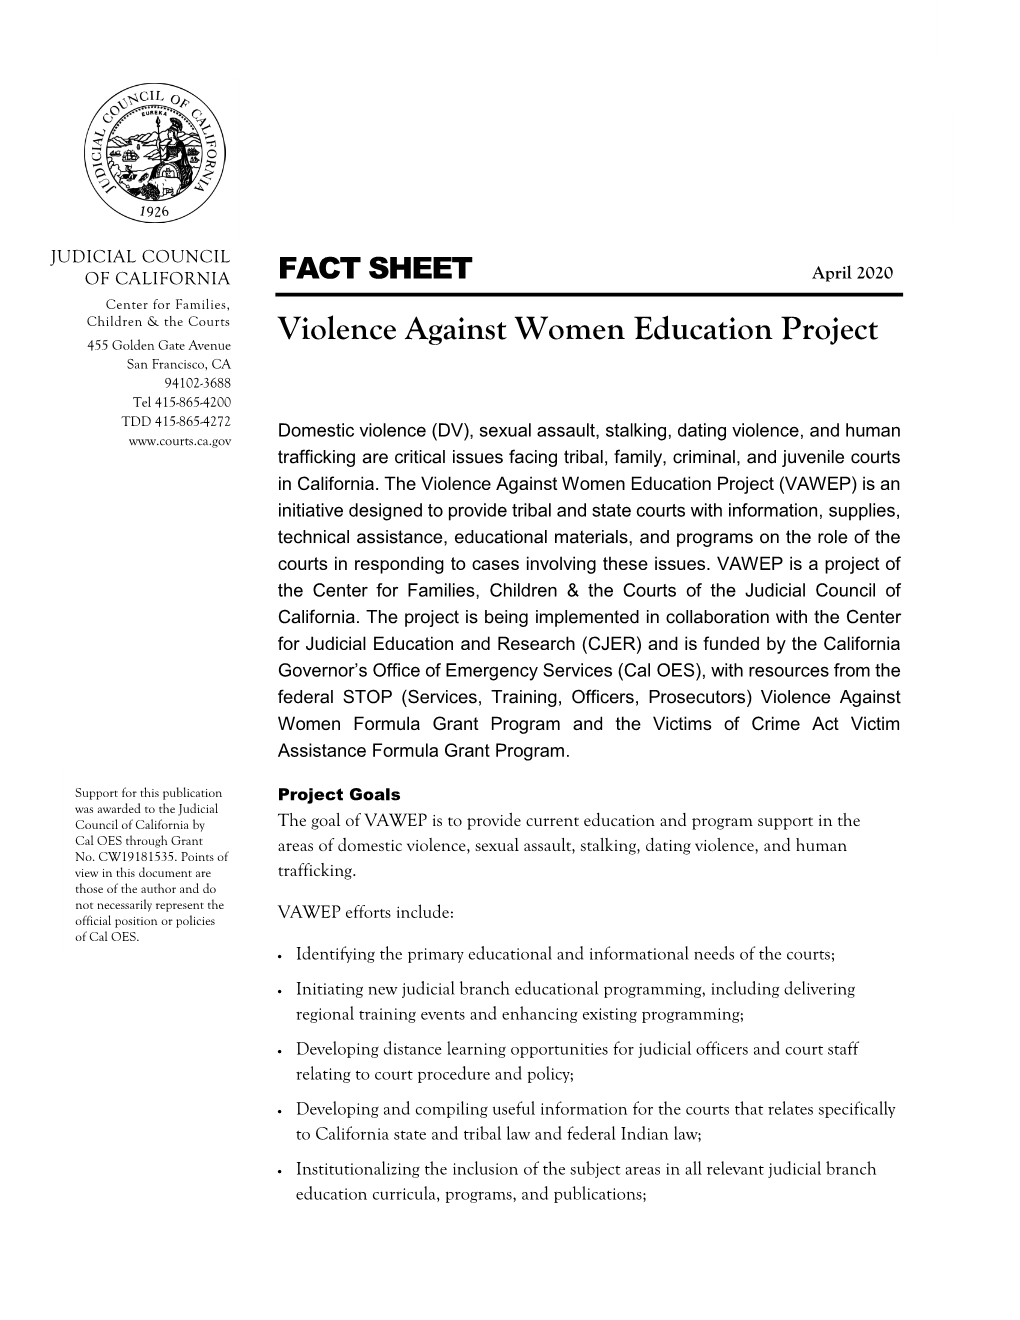 Violence Against Women Education Project Fact Sheet